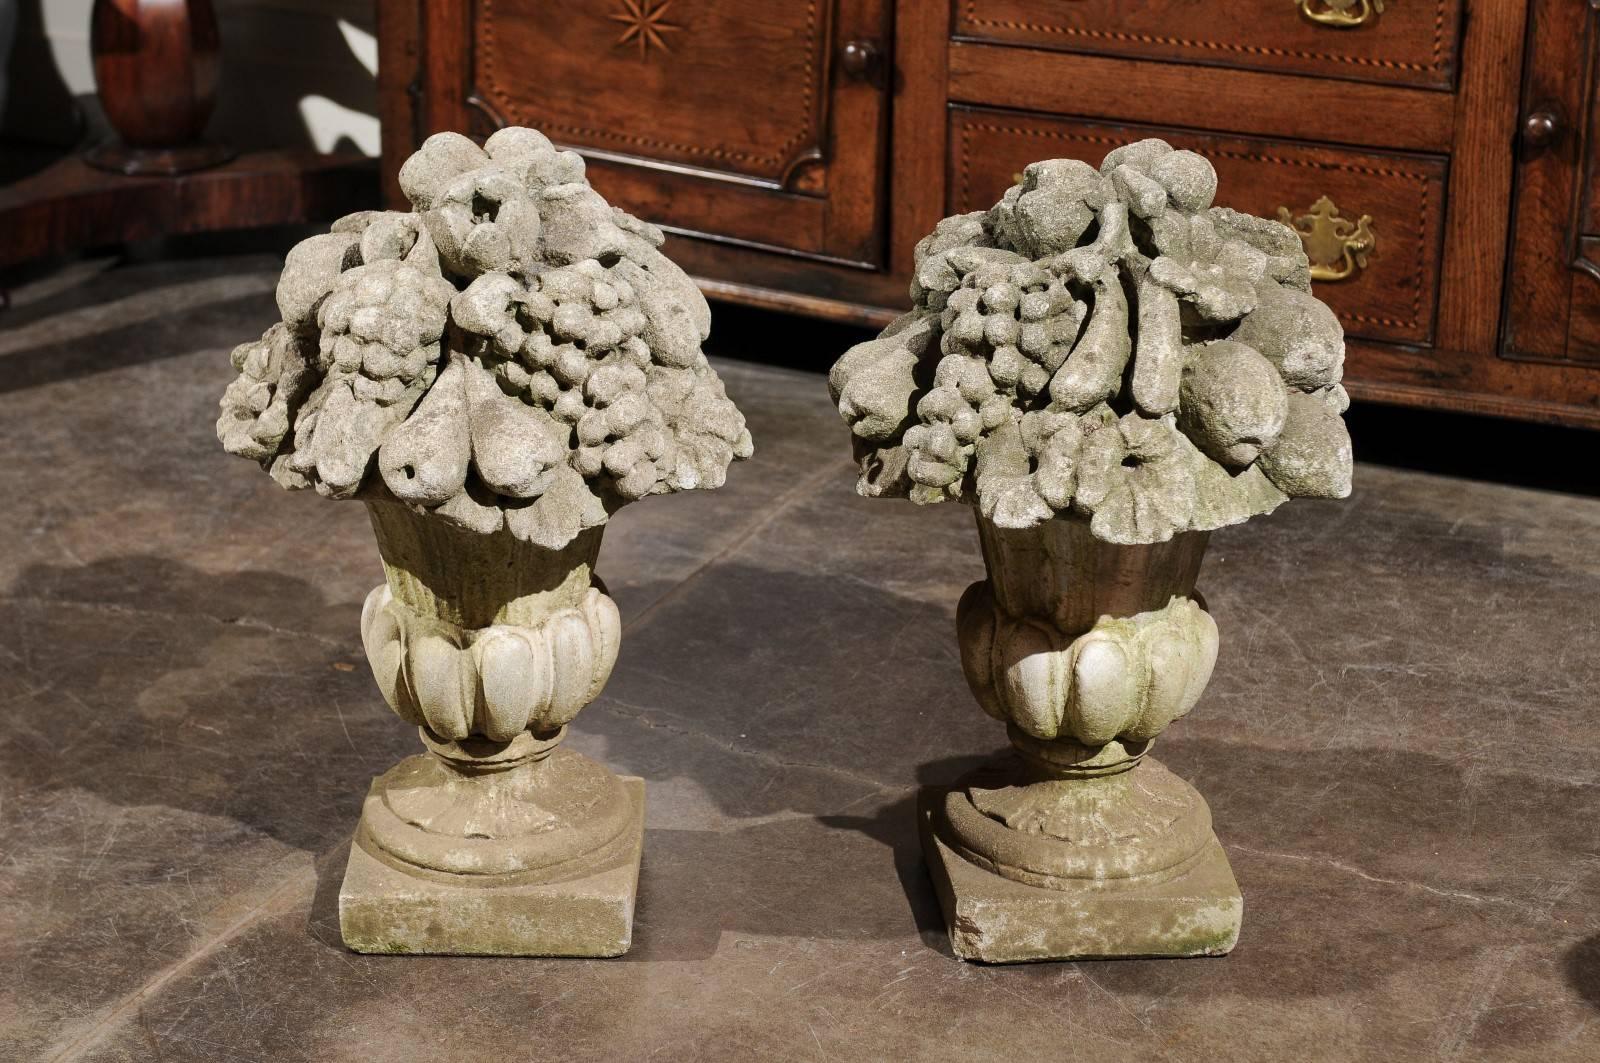 This pair of French stone sculptures from the early 20th century features two Médicis vases with gadroon decor on a square base. This exquisite pair of early 20th-century French stone sculptures showcases two Médicis vases, each richly adorned with